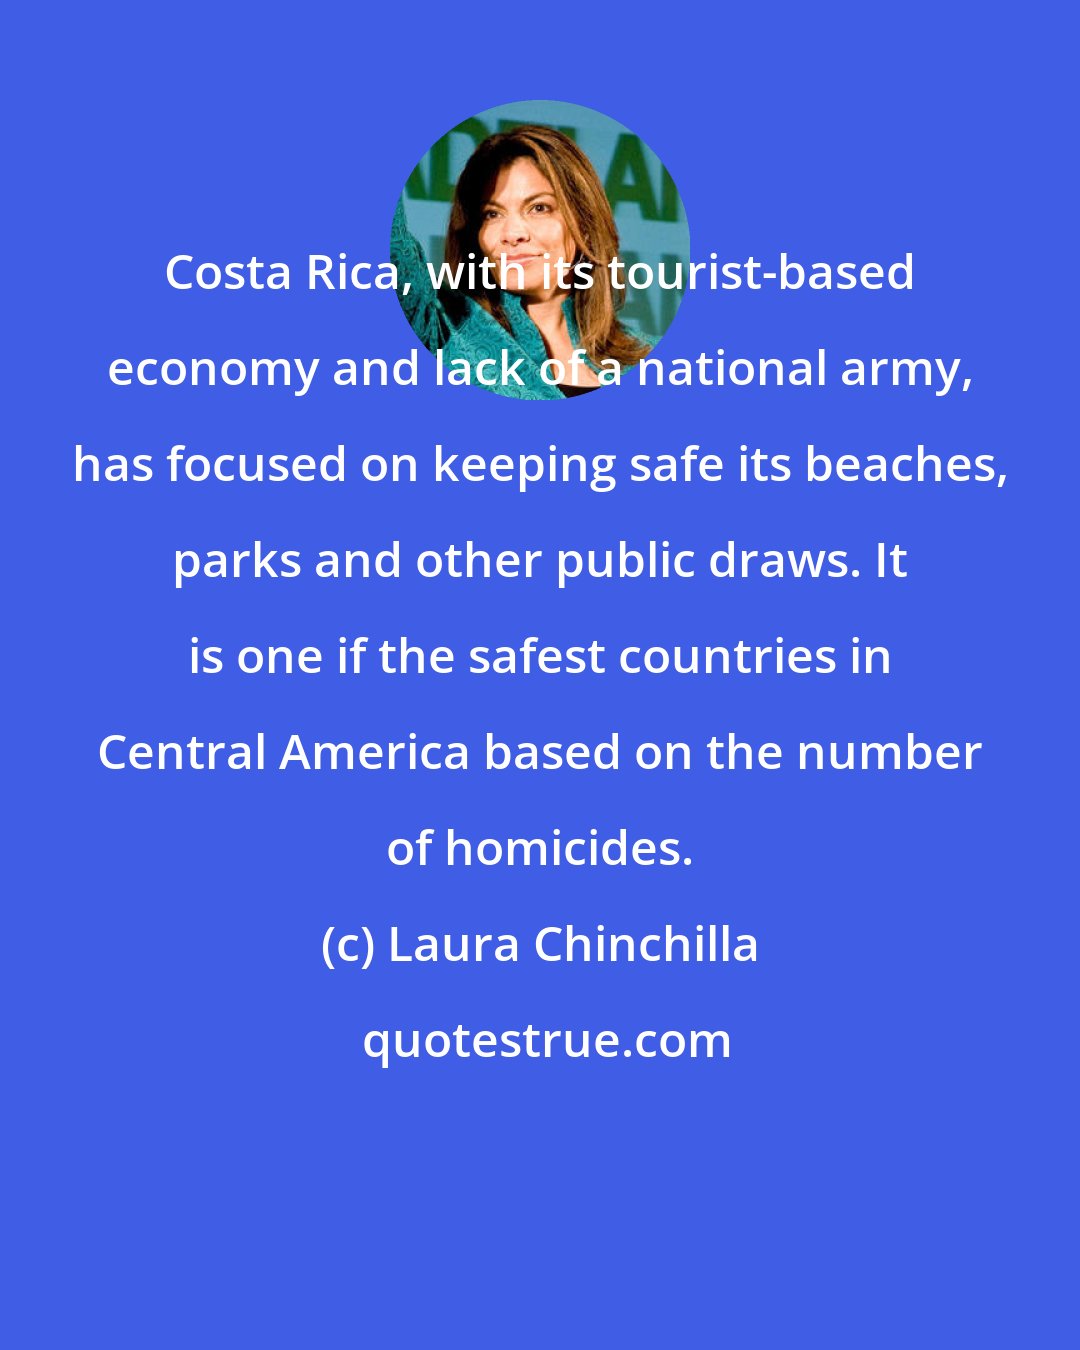 Laura Chinchilla: Costa Rica, with its tourist-based economy and lack of a national army, has focused on keeping safe its beaches, parks and other public draws. It is one if the safest countries in Central America based on the number of homicides.